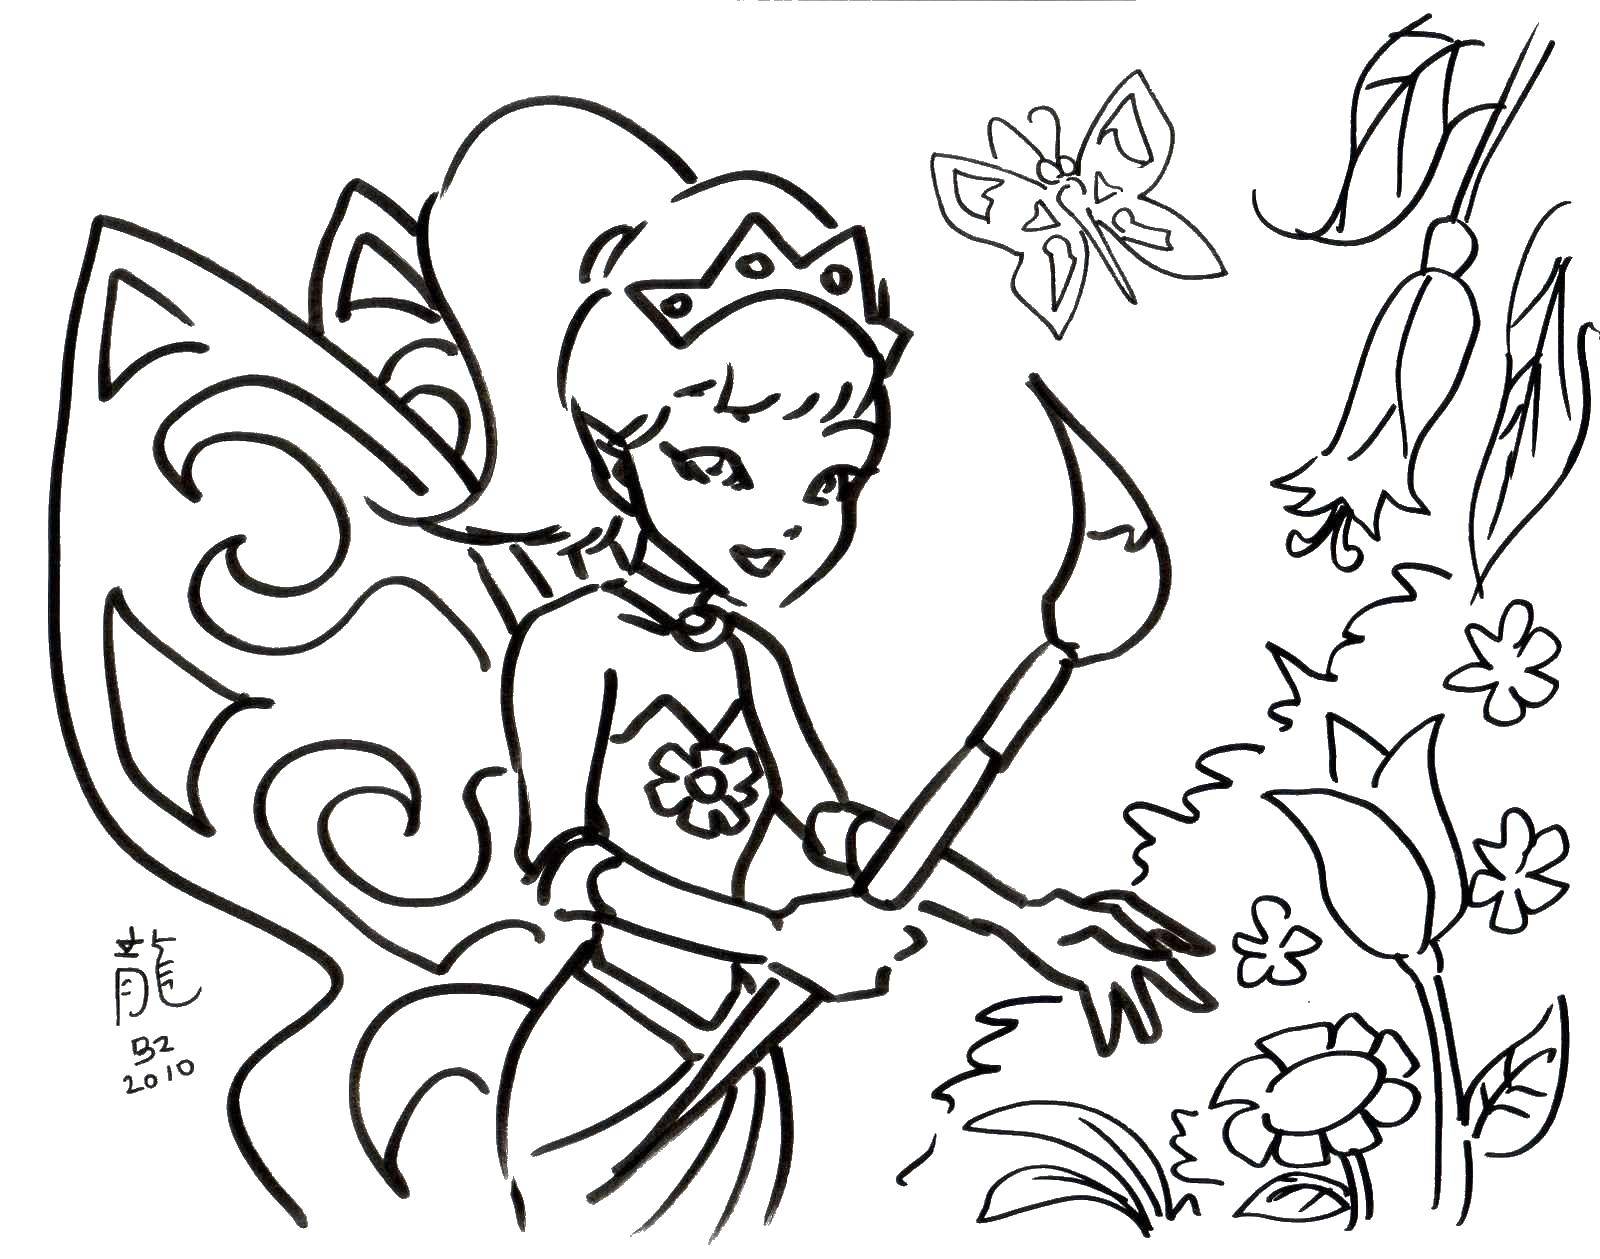 Coloring Fairy colors of flowers. Category fairies. Tags:  Fairy, forest, fairy tale.